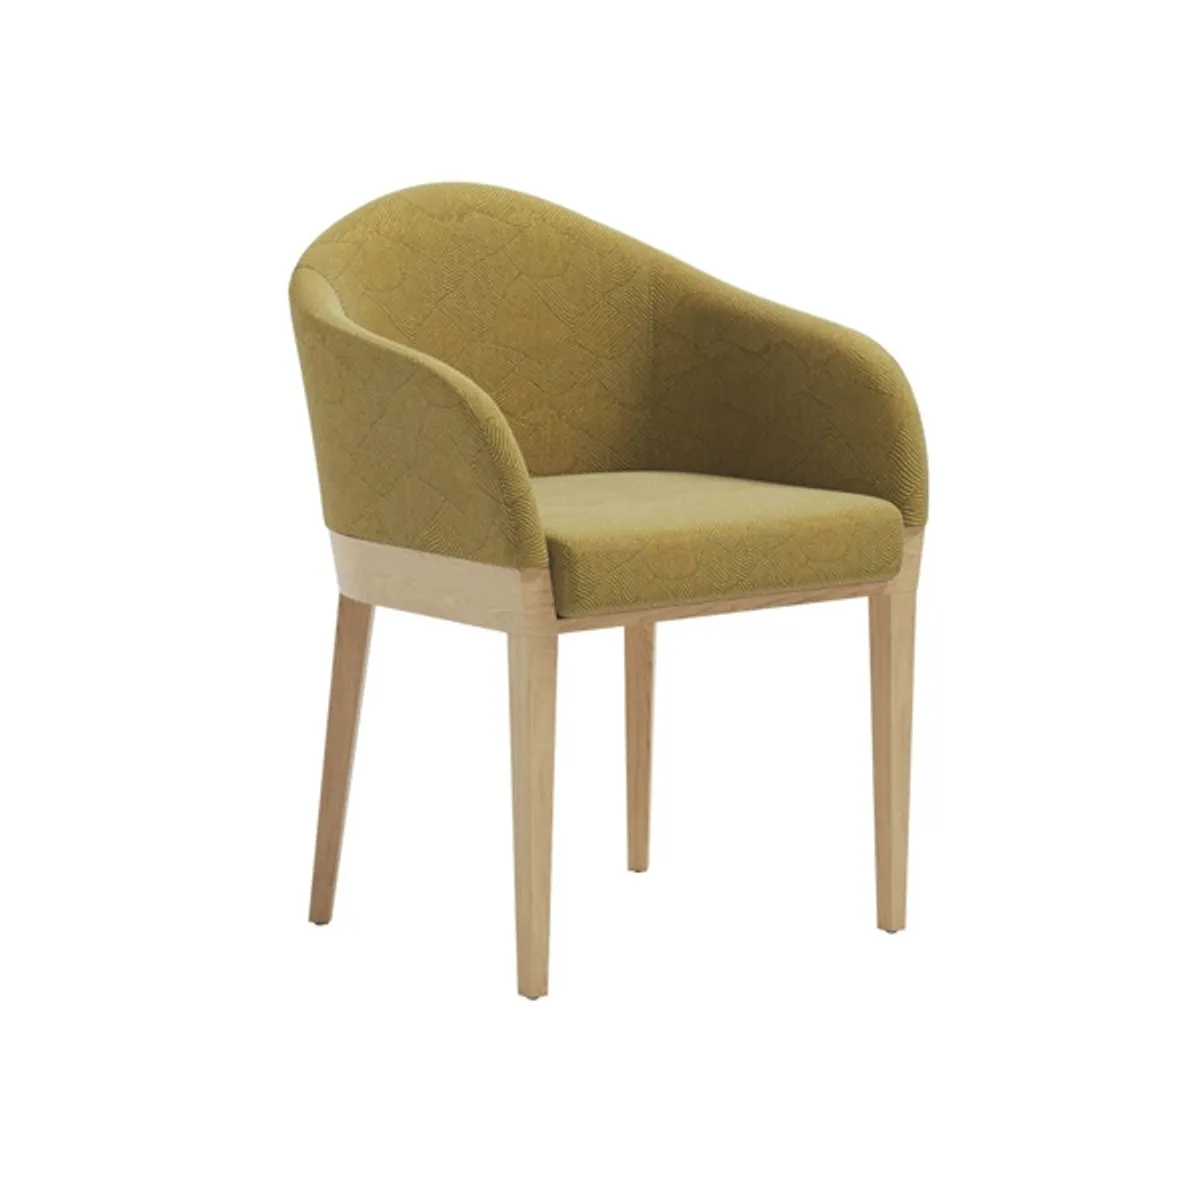 Agata armchair Inside Out Contracts5